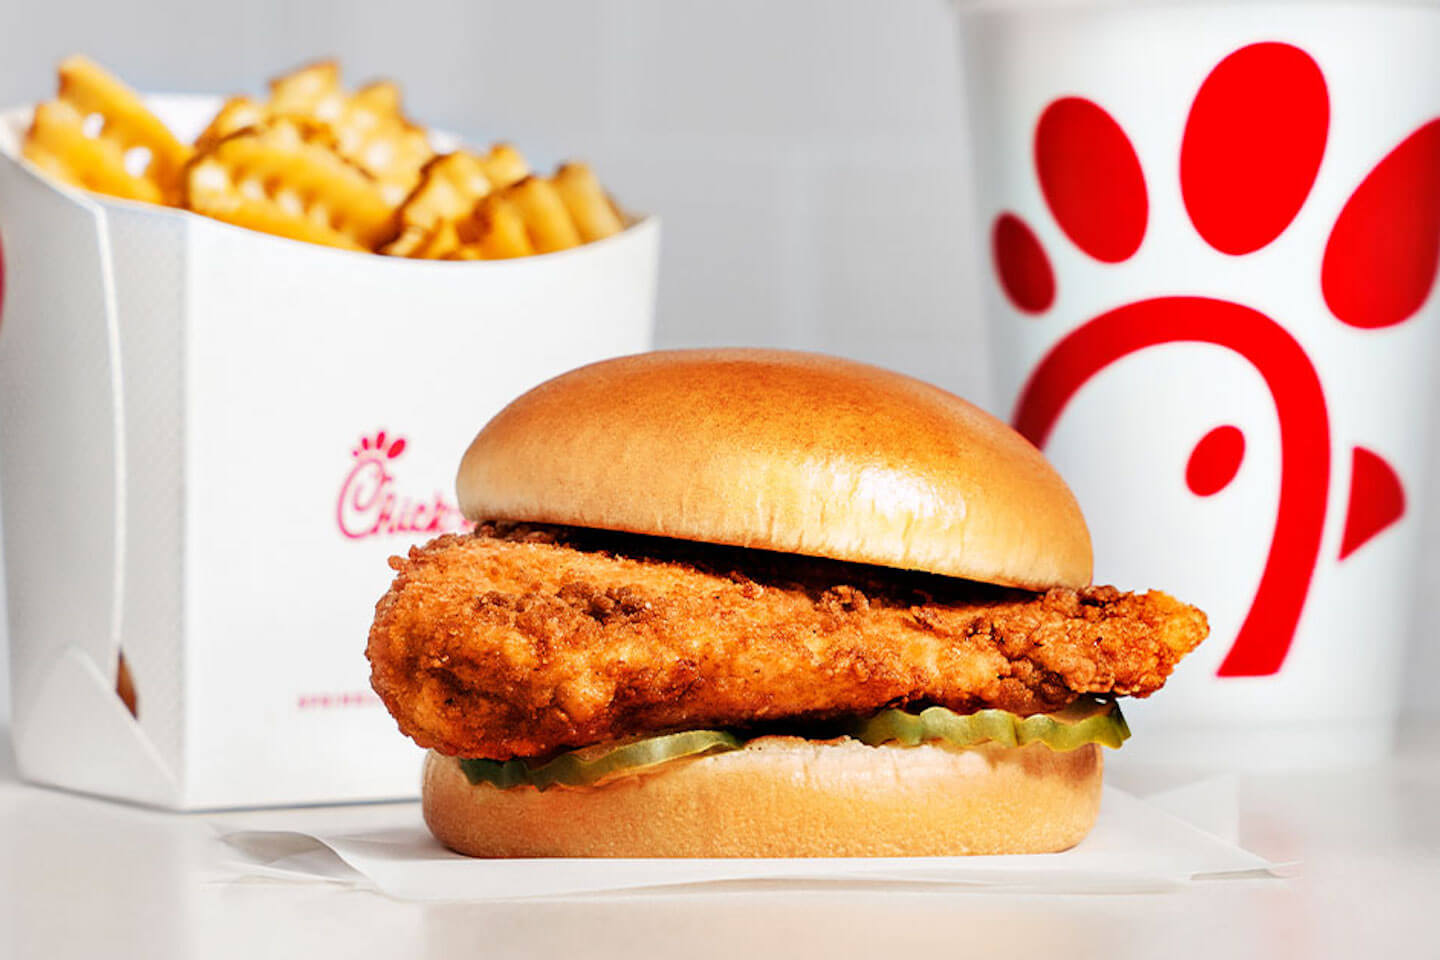 A Chick-fil-A Chicken Sandwich sits in front of a carton of Waffle Potato Fries and a drink. 